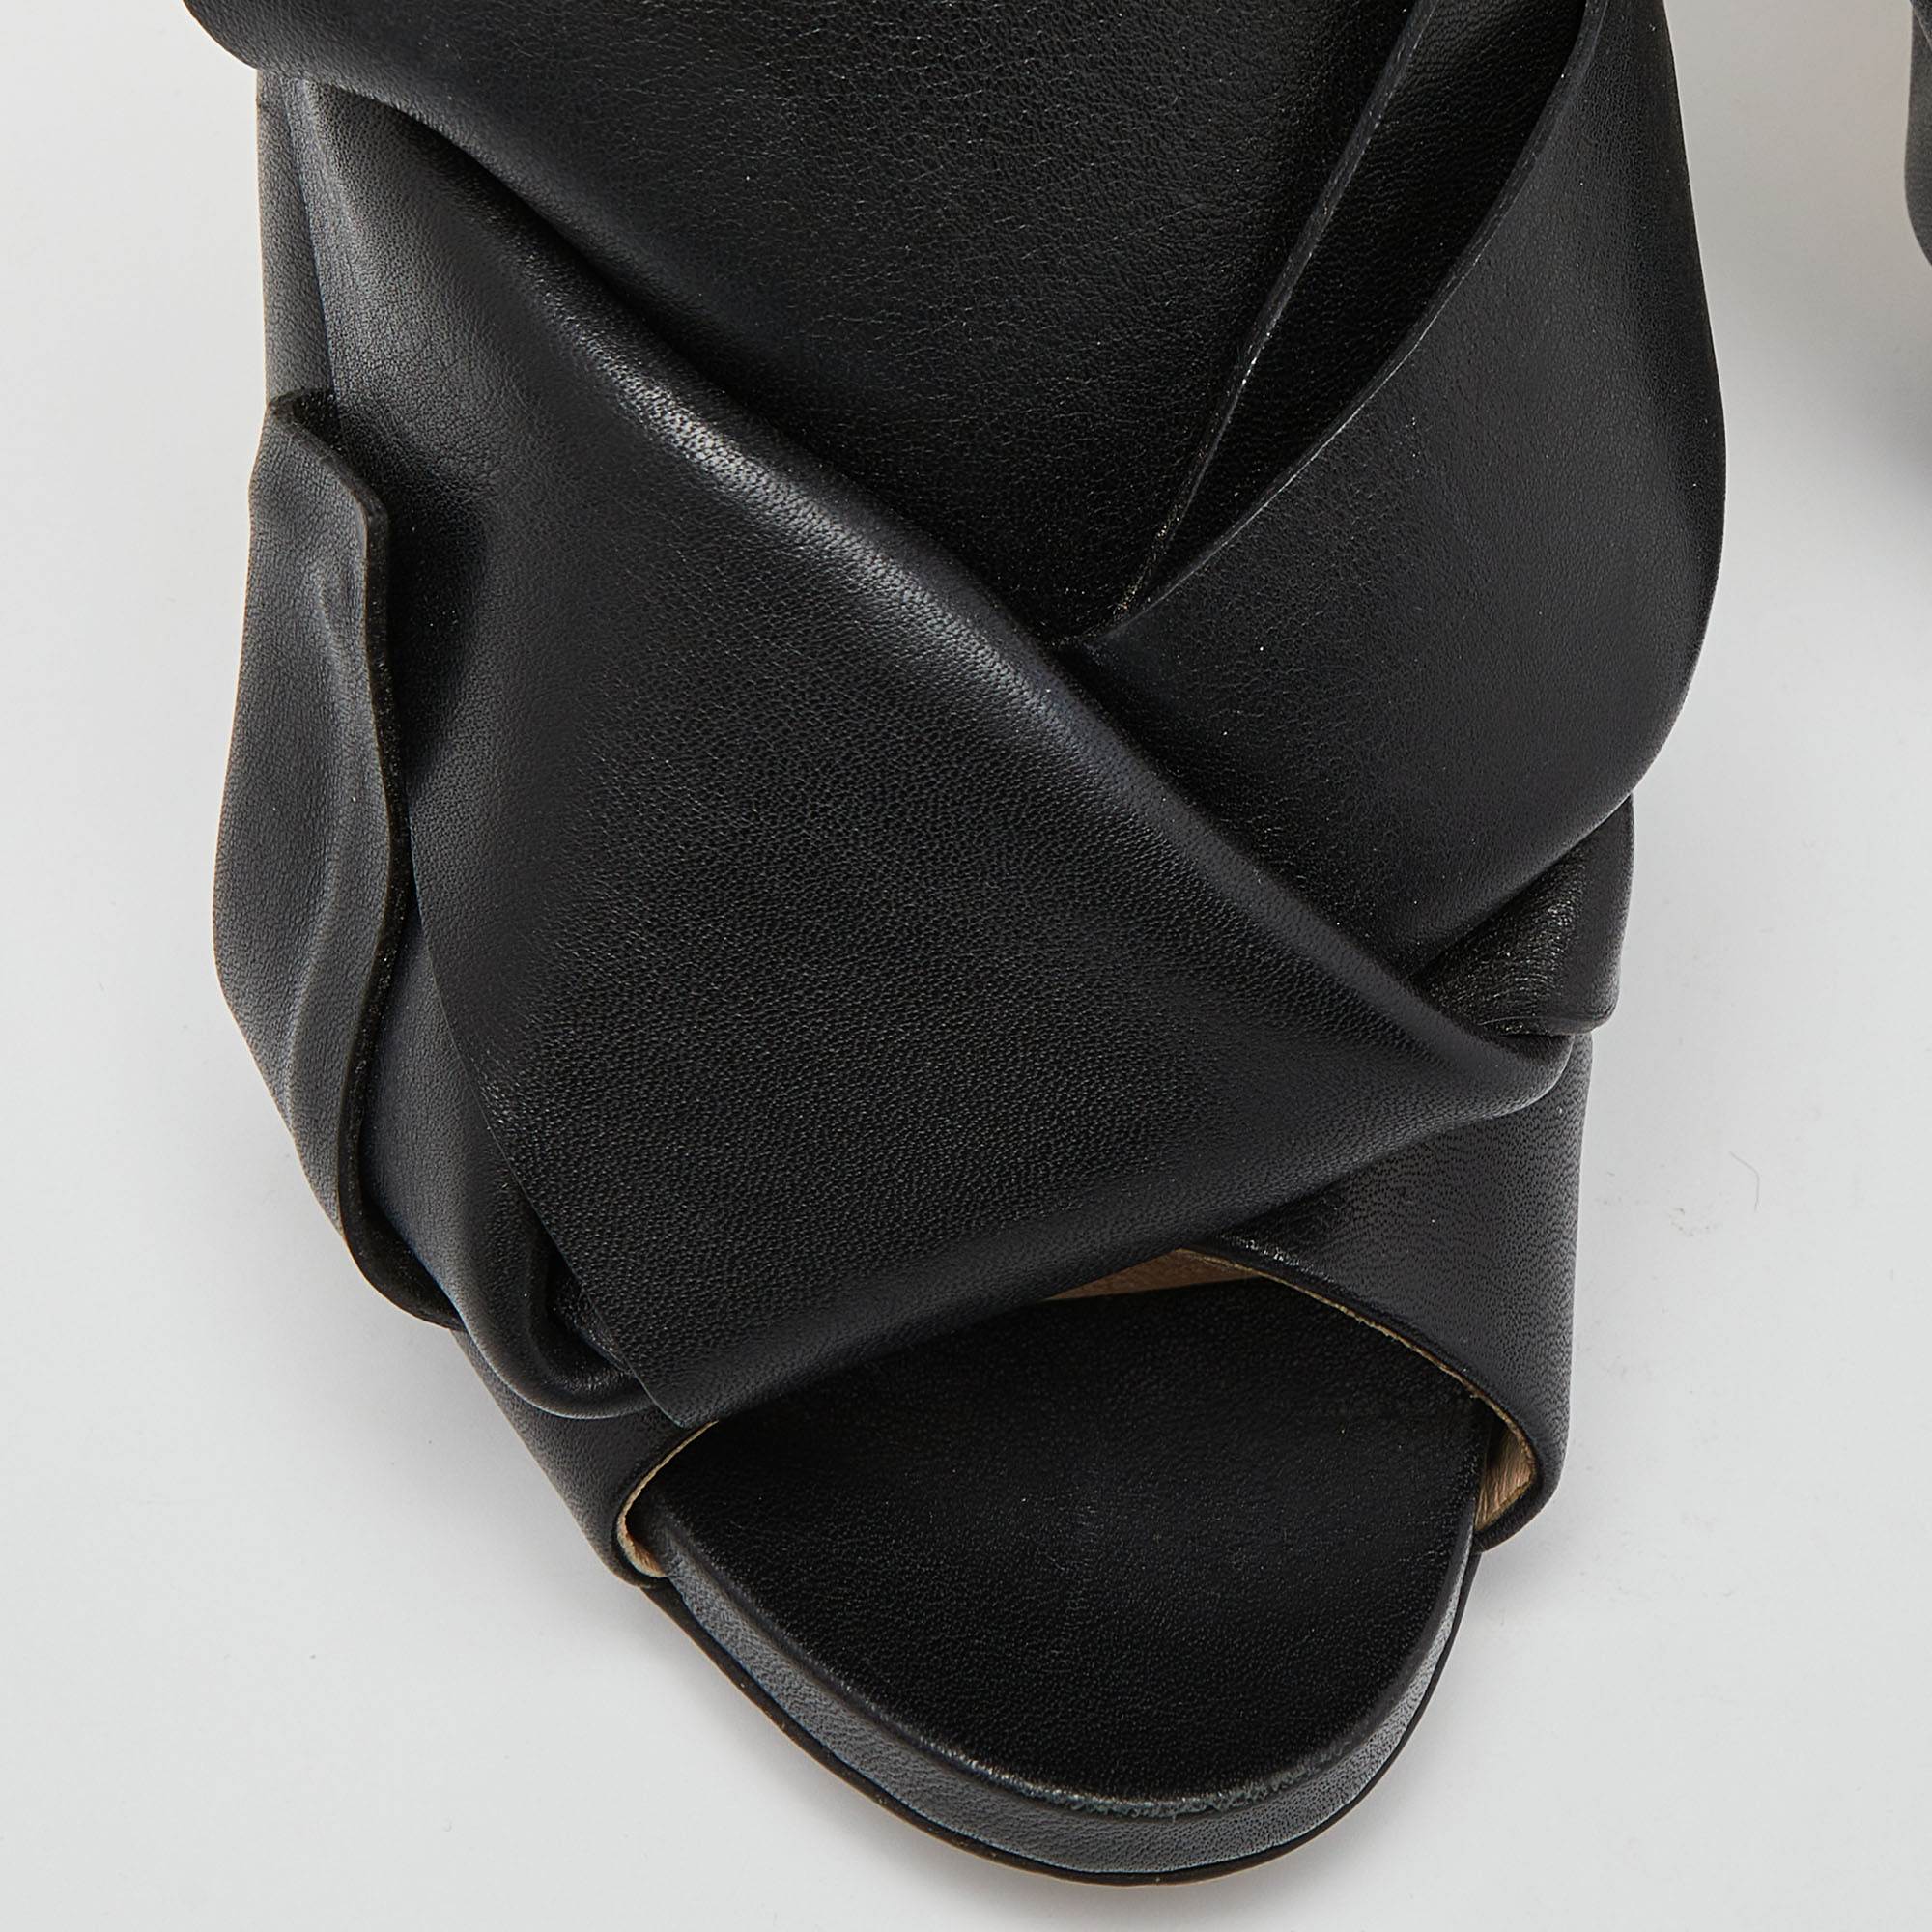 N°21 Black Leather Raso Knot Mules Size 38